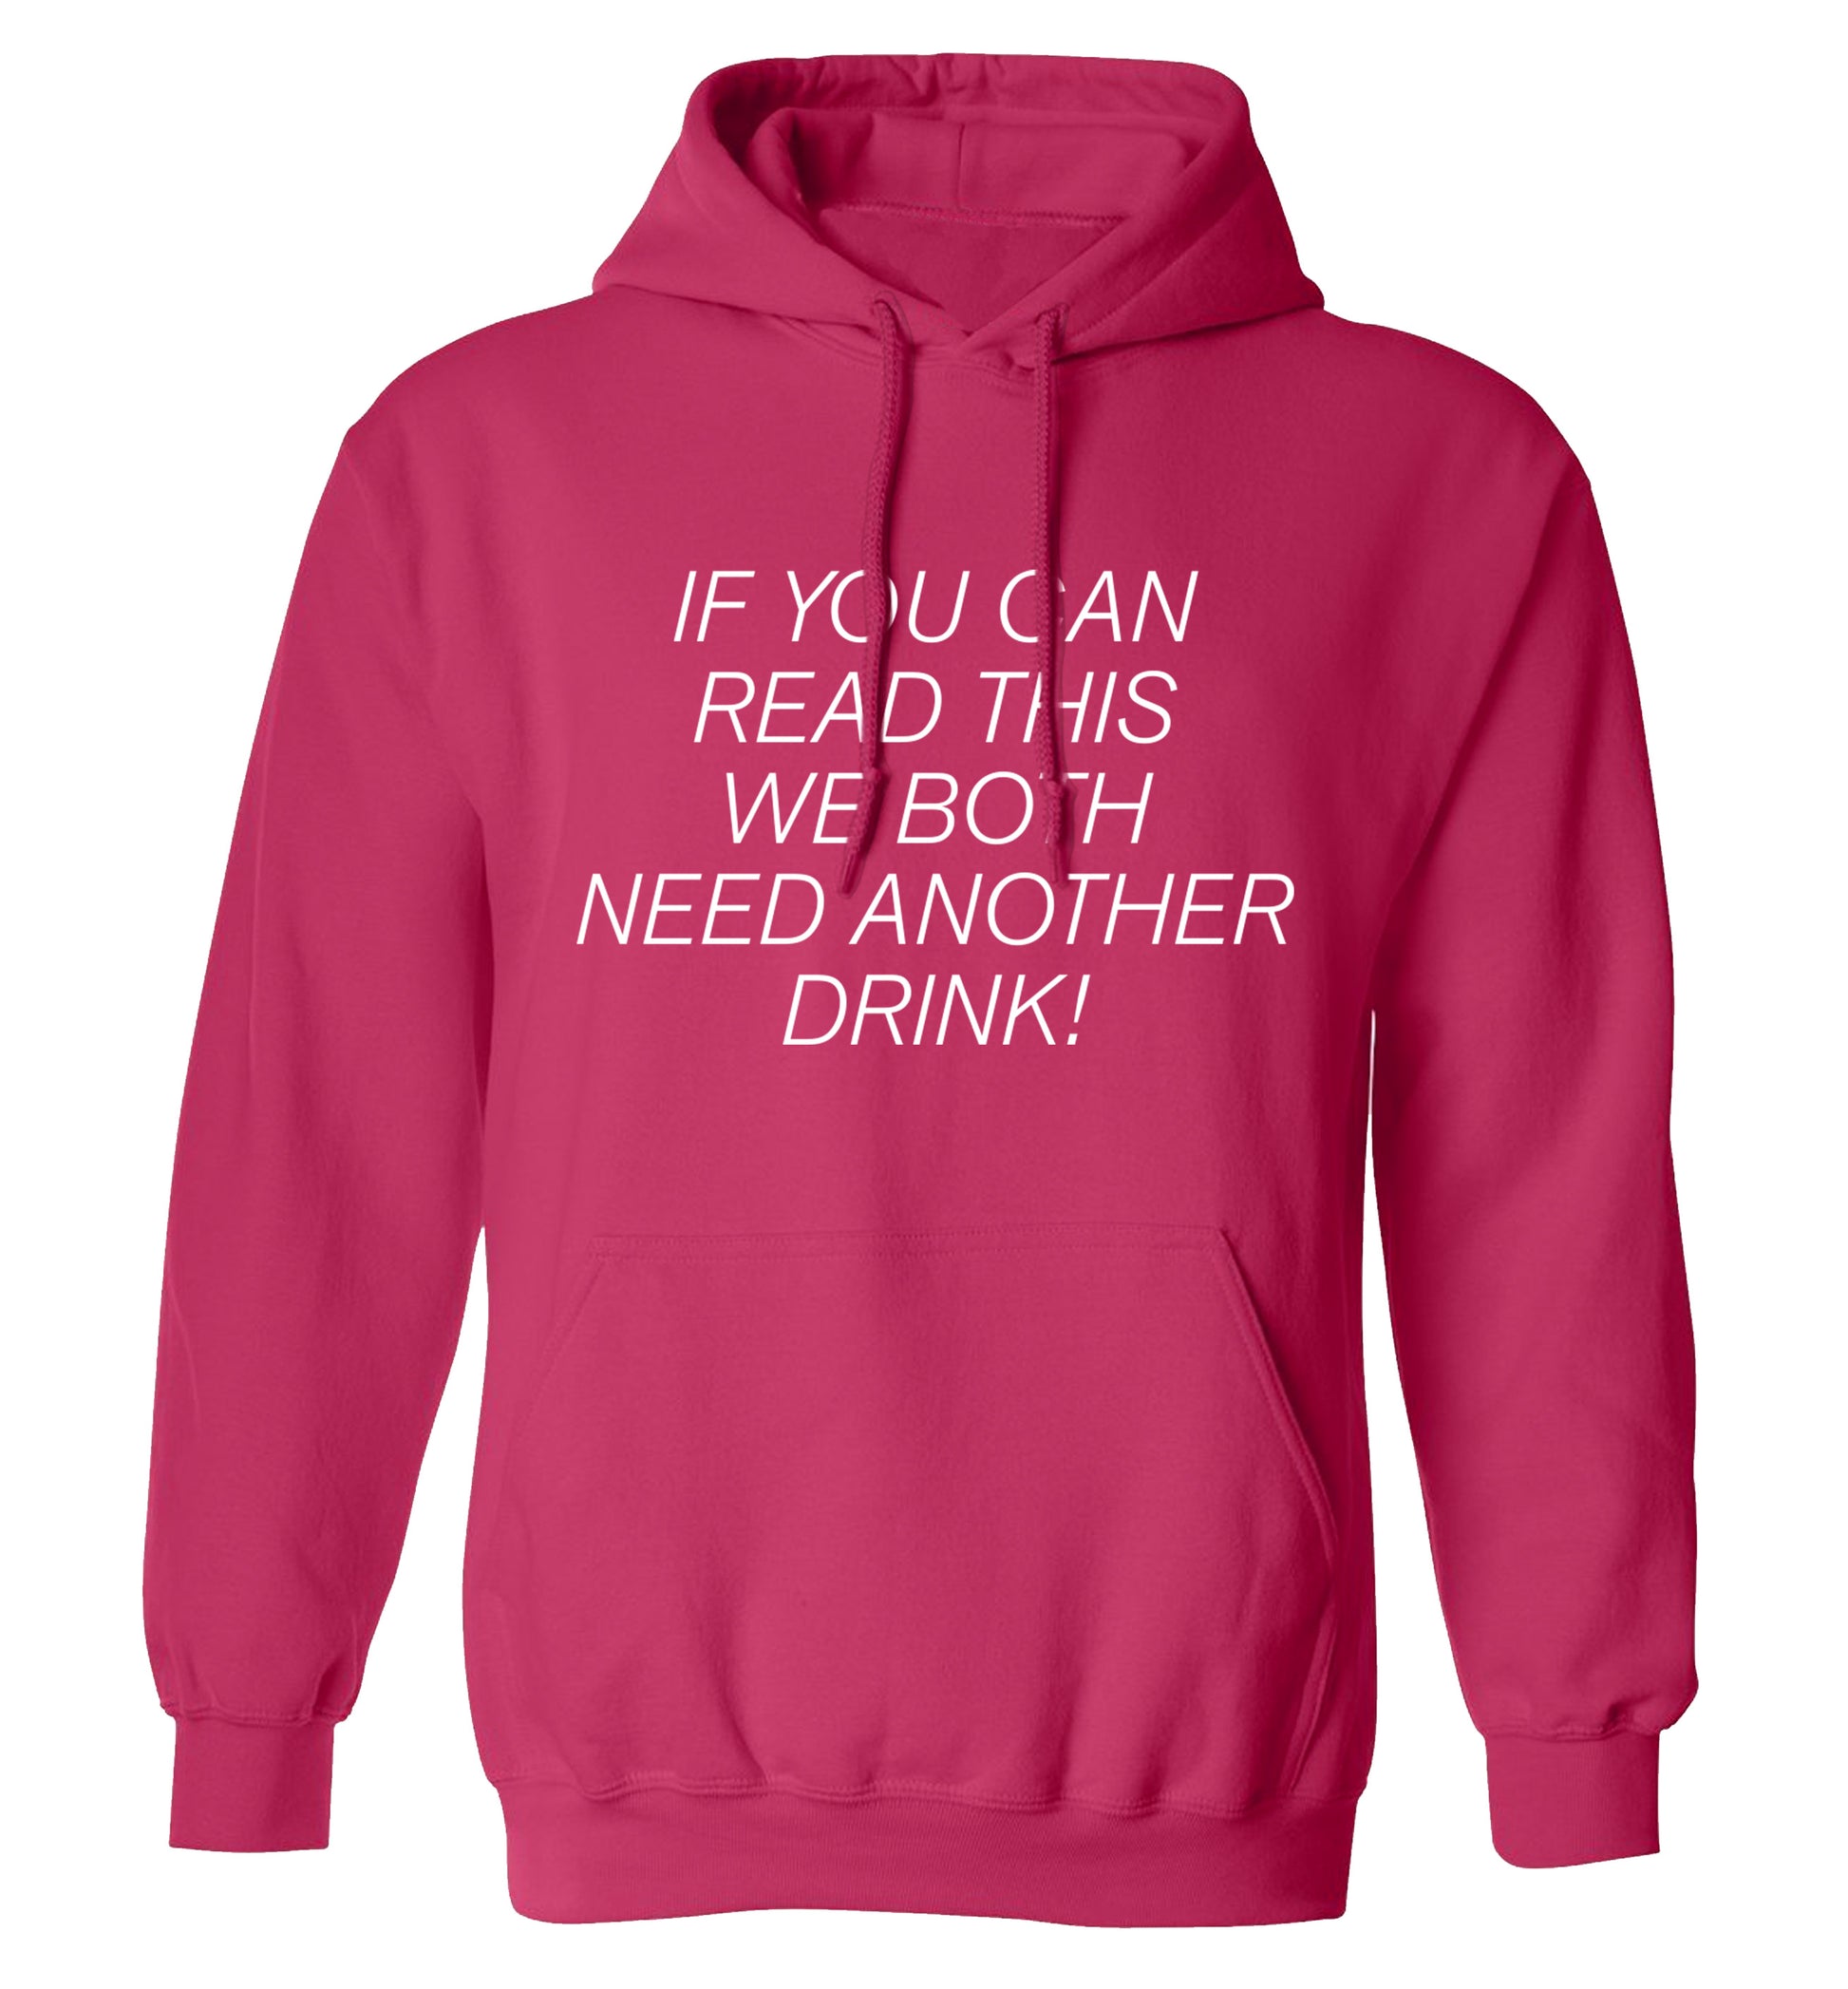 If you can read this we both need another drink! adults unisex pink hoodie 2XL